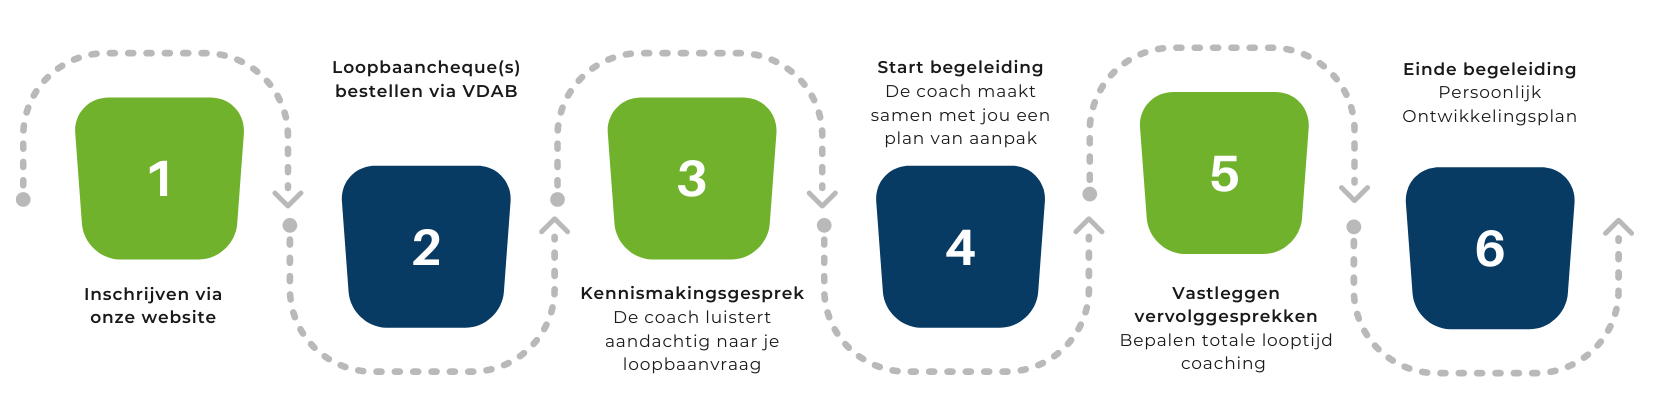 Stappenplan outplacement